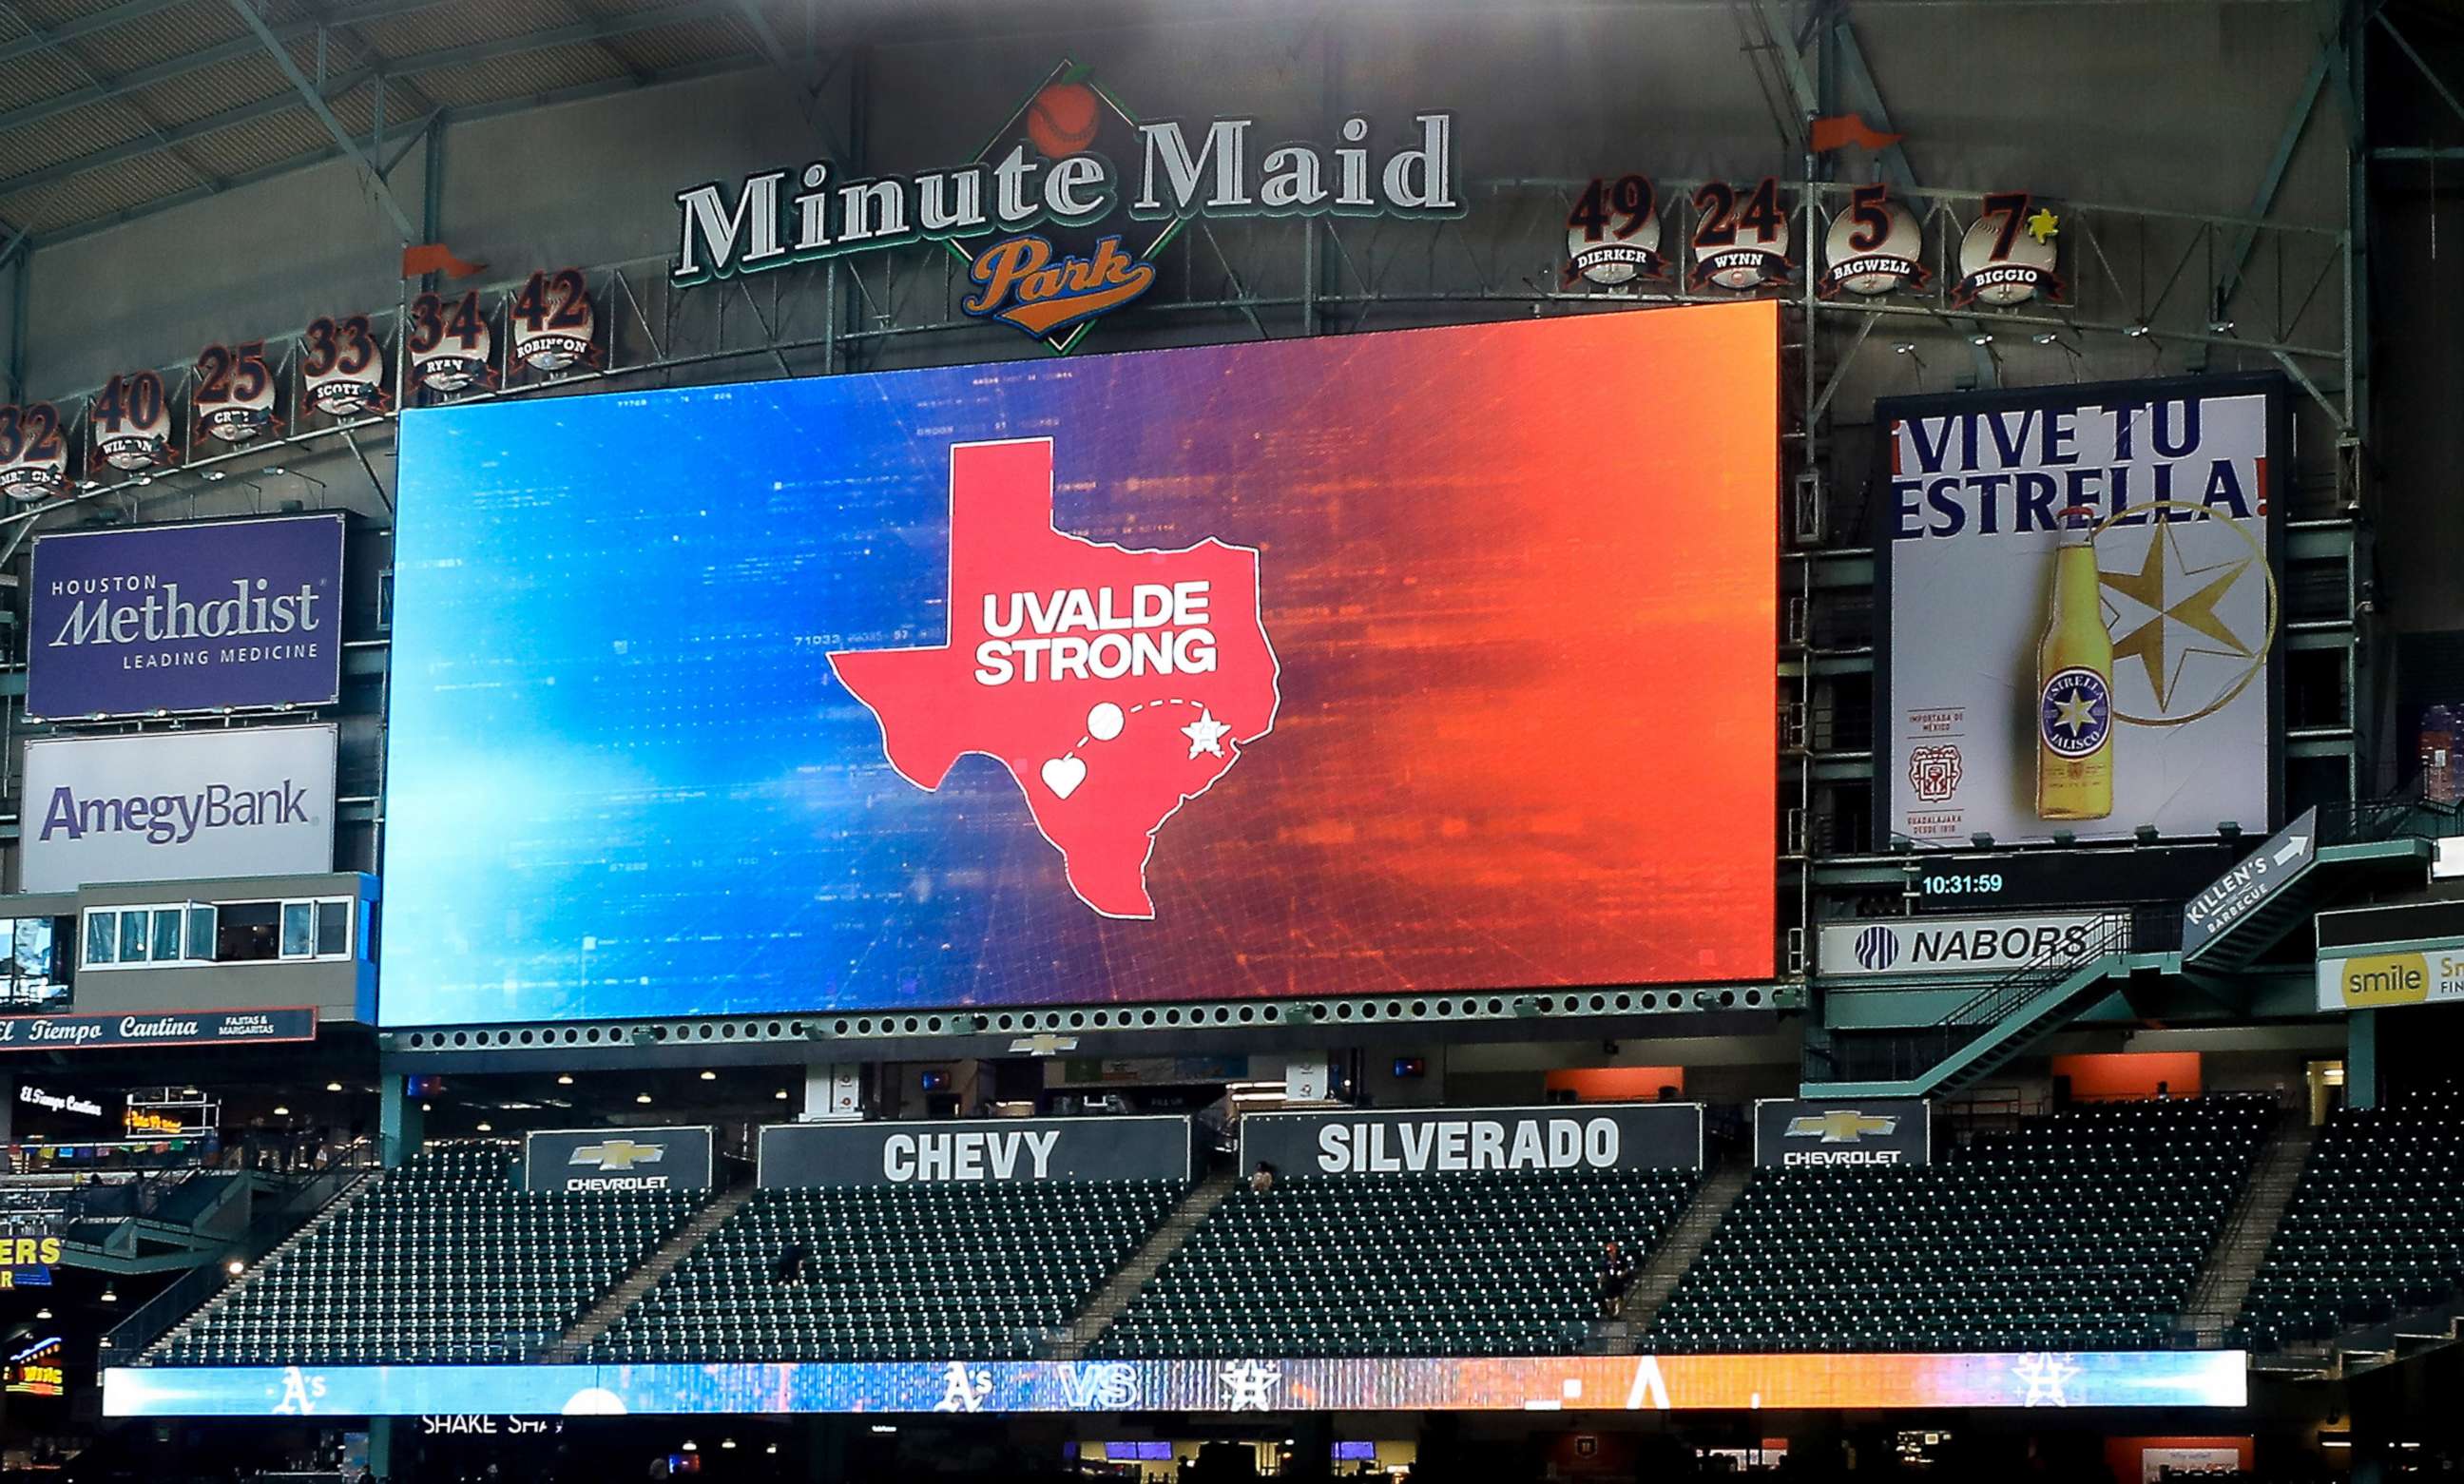 PHOTO: Members of the community of Uvalde, Texas attend the game as the Houston Astros host Uvalde Strong Day before the game against the Oakland Athletics at Minute Maid Park in Houston, Aug. 14, 2022.